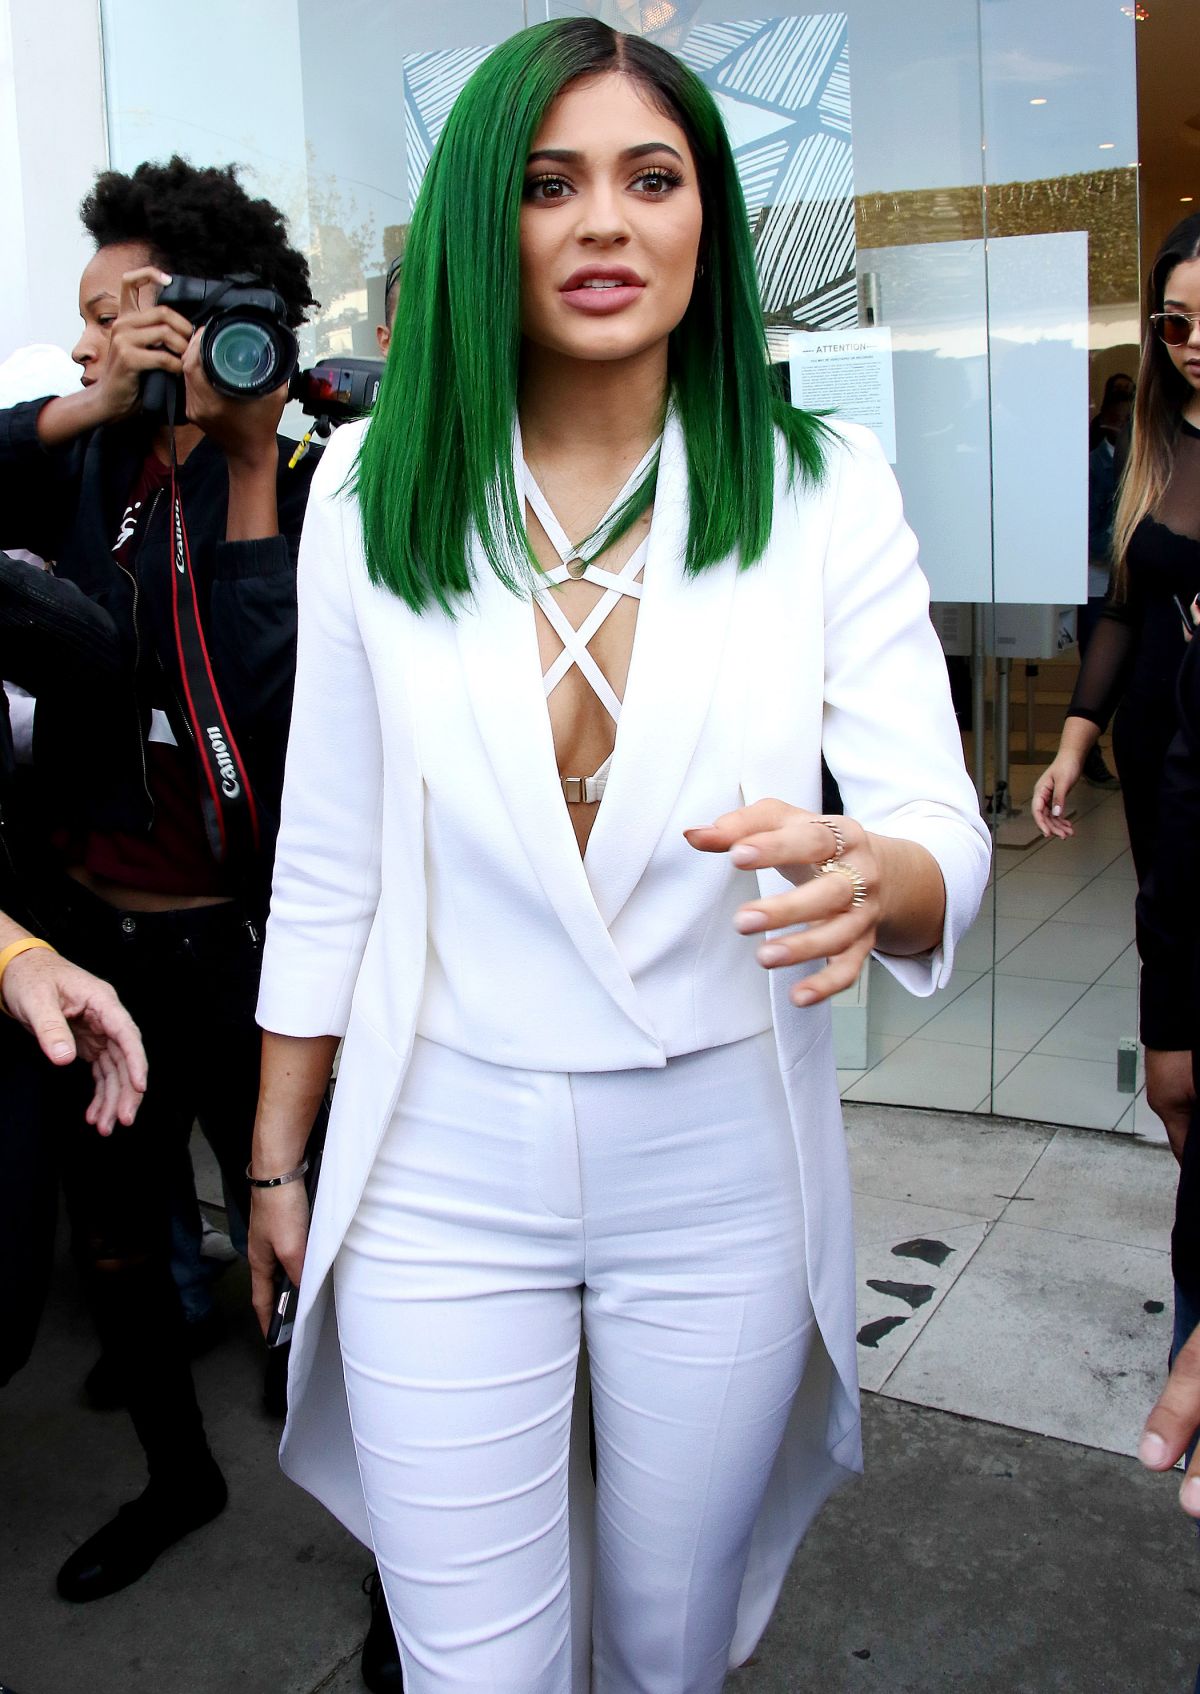 KYLIE JENNER Debuts Emerald Green Hair At Dash Store In Los